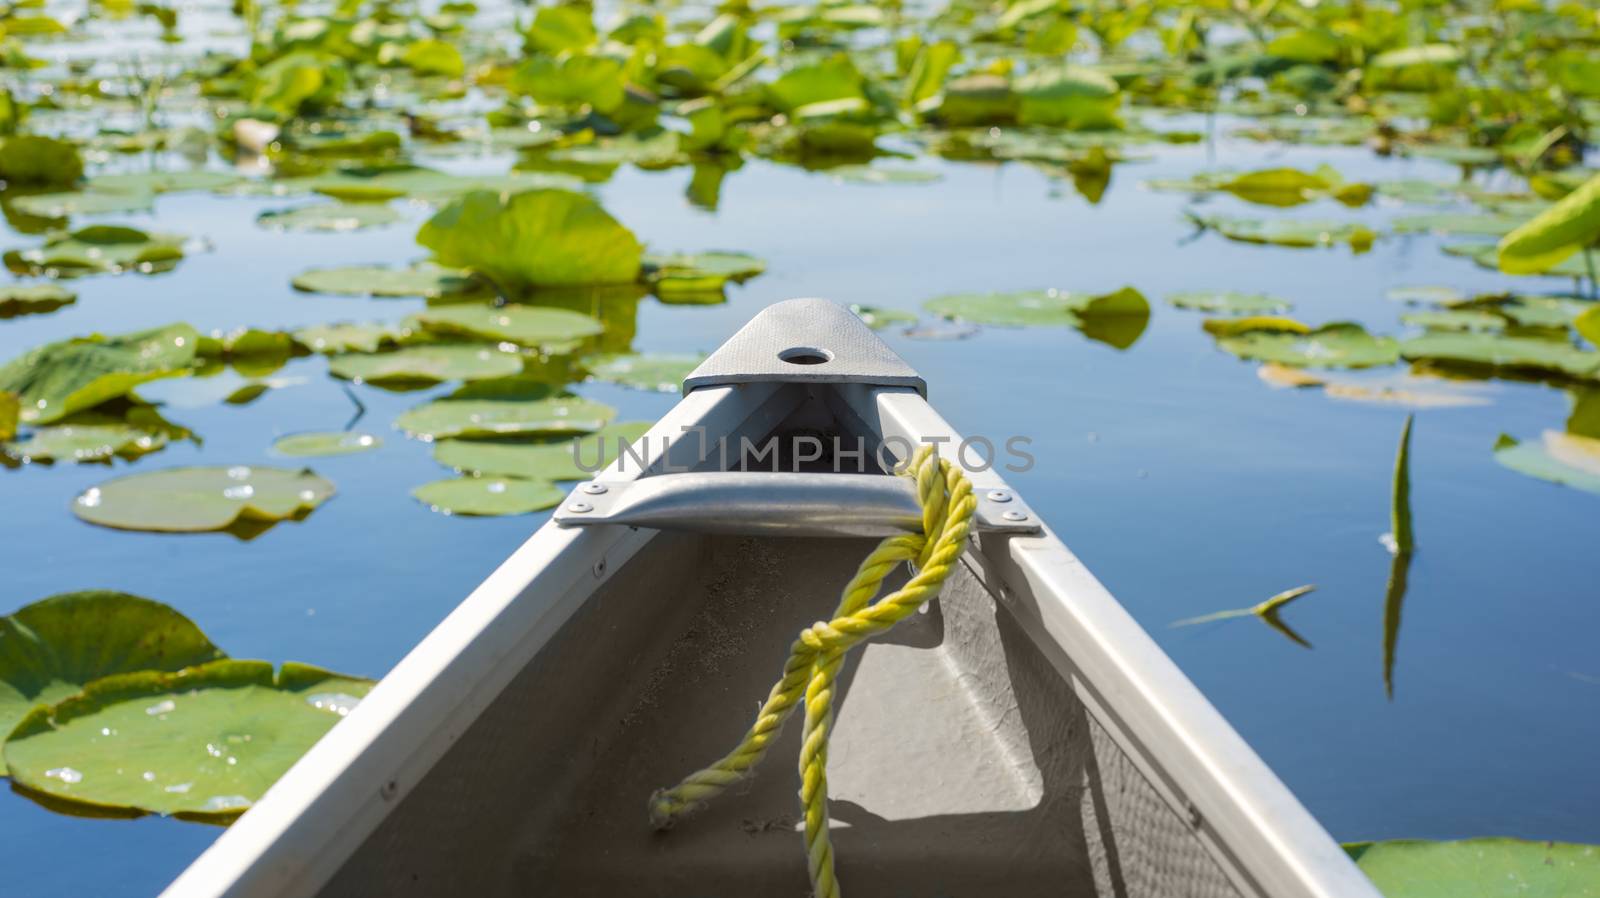 Tip of a canoe sailing among lily pads. Pelee point conservation area, Ontario, Canada